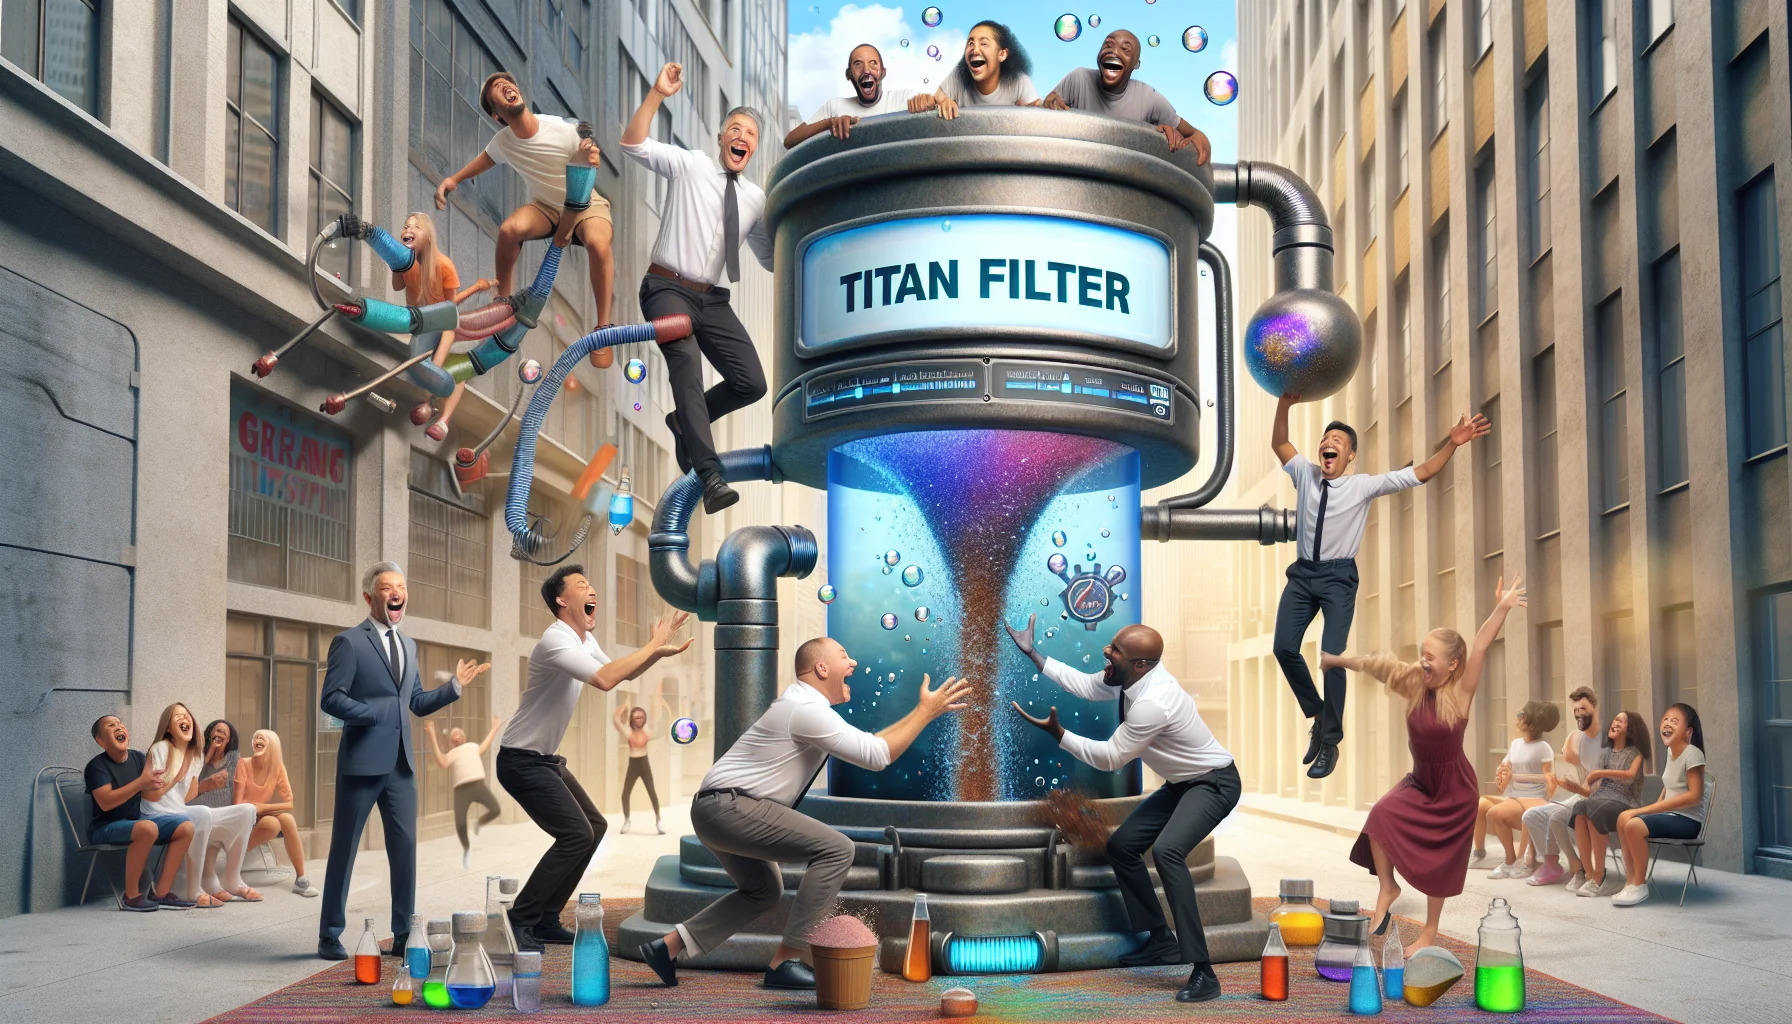 Create a humorous and enticing image of a futuristic device named 'Titan Filter' being used to generate electricity in an unusual way. The scene is set in an everyday urban setting and the device is unusually large. People from different descents such as Caucasian, Hispanic, Black, and Middle-Eastern of both genders are in the scene, laughing and lightly participating in this odd energy generation process. Exciting colors, bubbles, and animated electric bolts could be present to indicate the ongoing process, giving the whole scene a playful and engaging atmosphere.